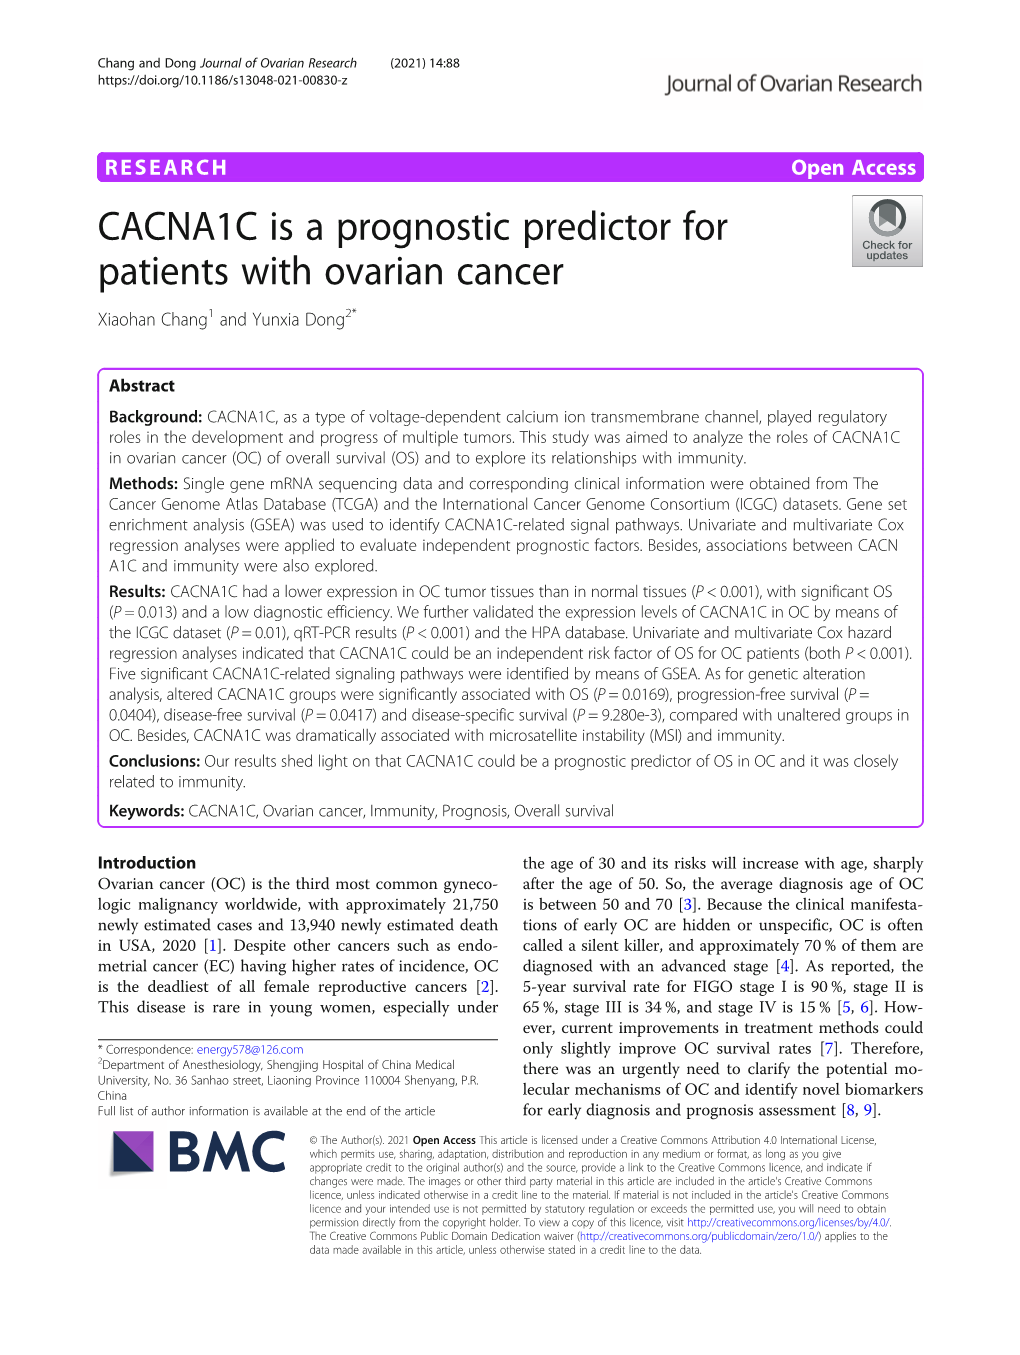 CACNA1C Is a Prognostic Predictor for Patients with Ovarian Cancer Xiaohan Chang1 and Yunxia Dong2*